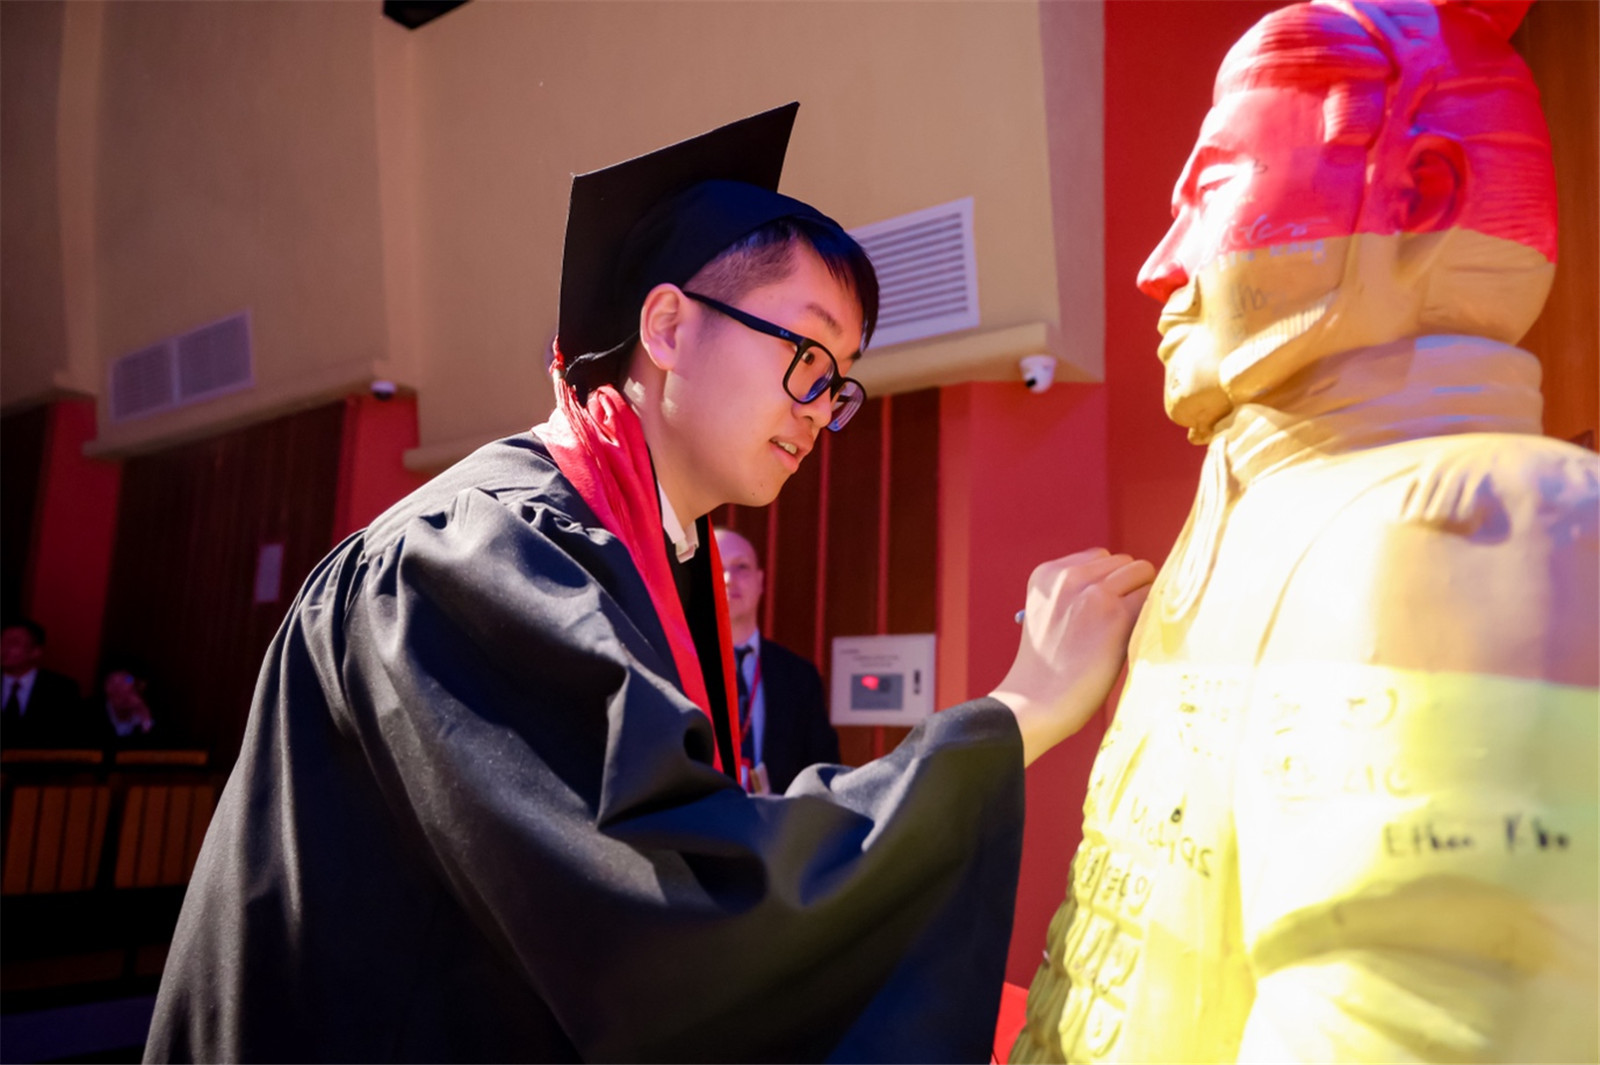 Brian signs his name onto the Terracotta Warrior during the Graduation Ceremony